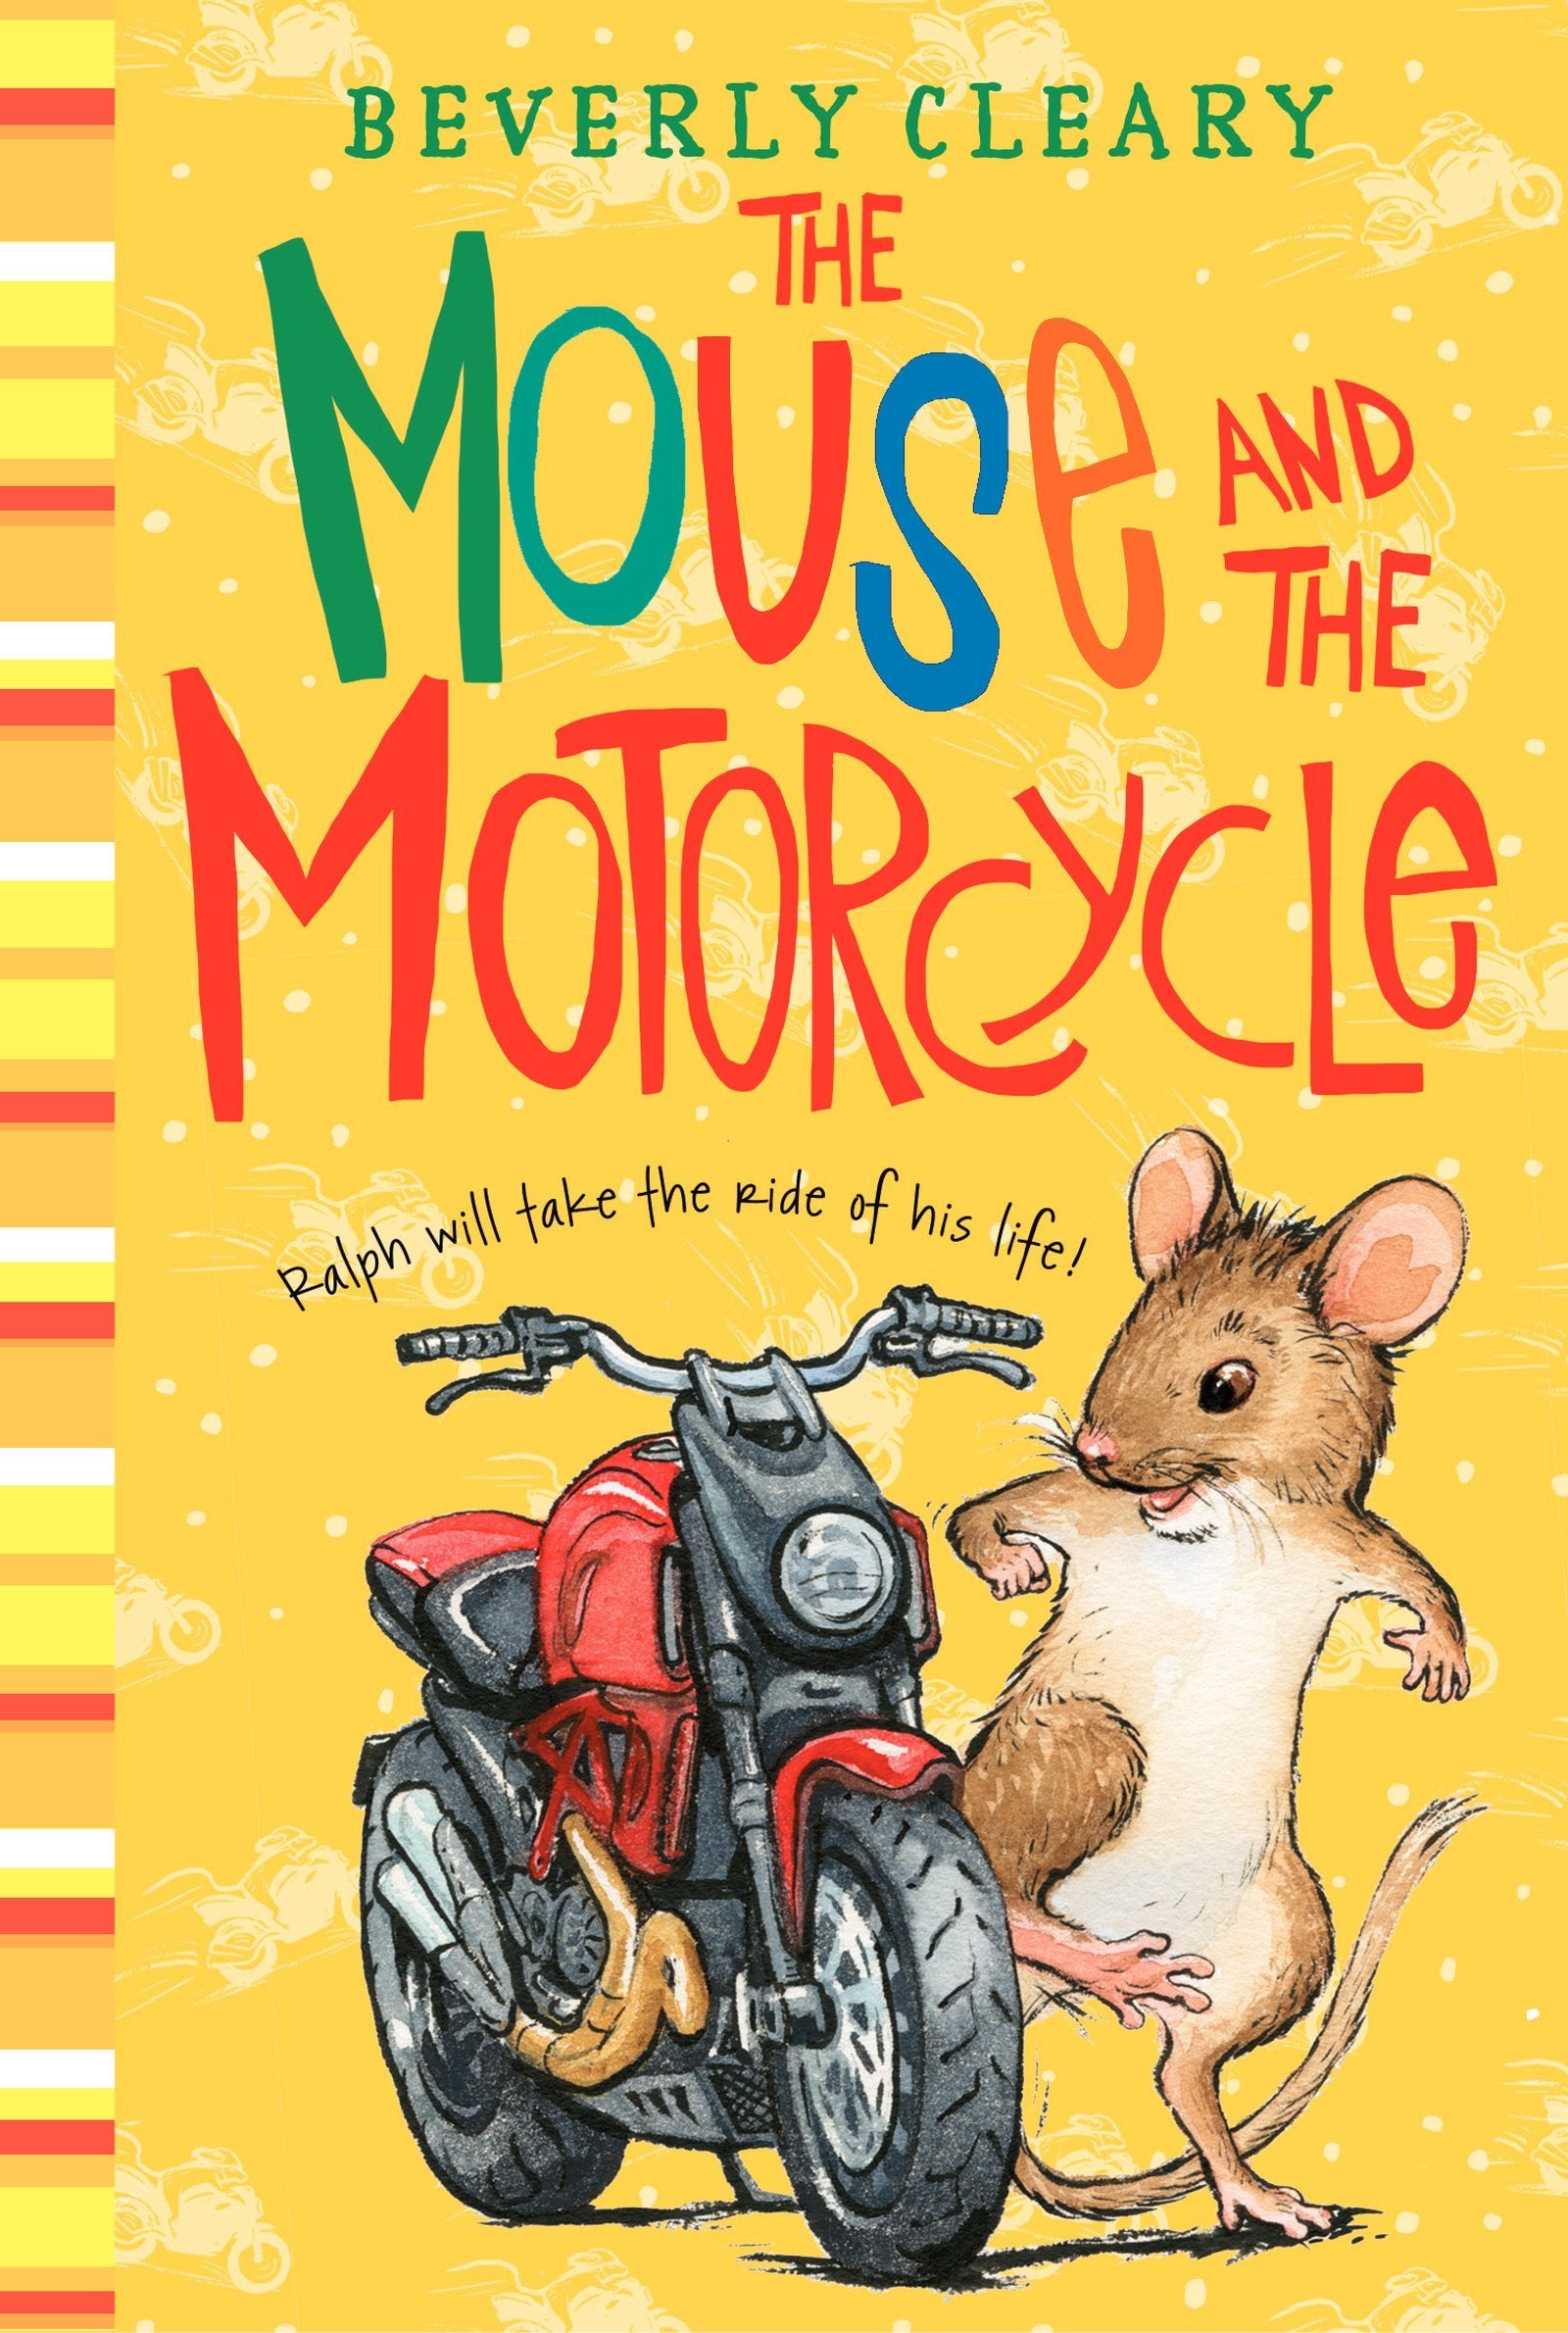 THE MOUSE AND THE MOTORCYCLE (RA - 9253